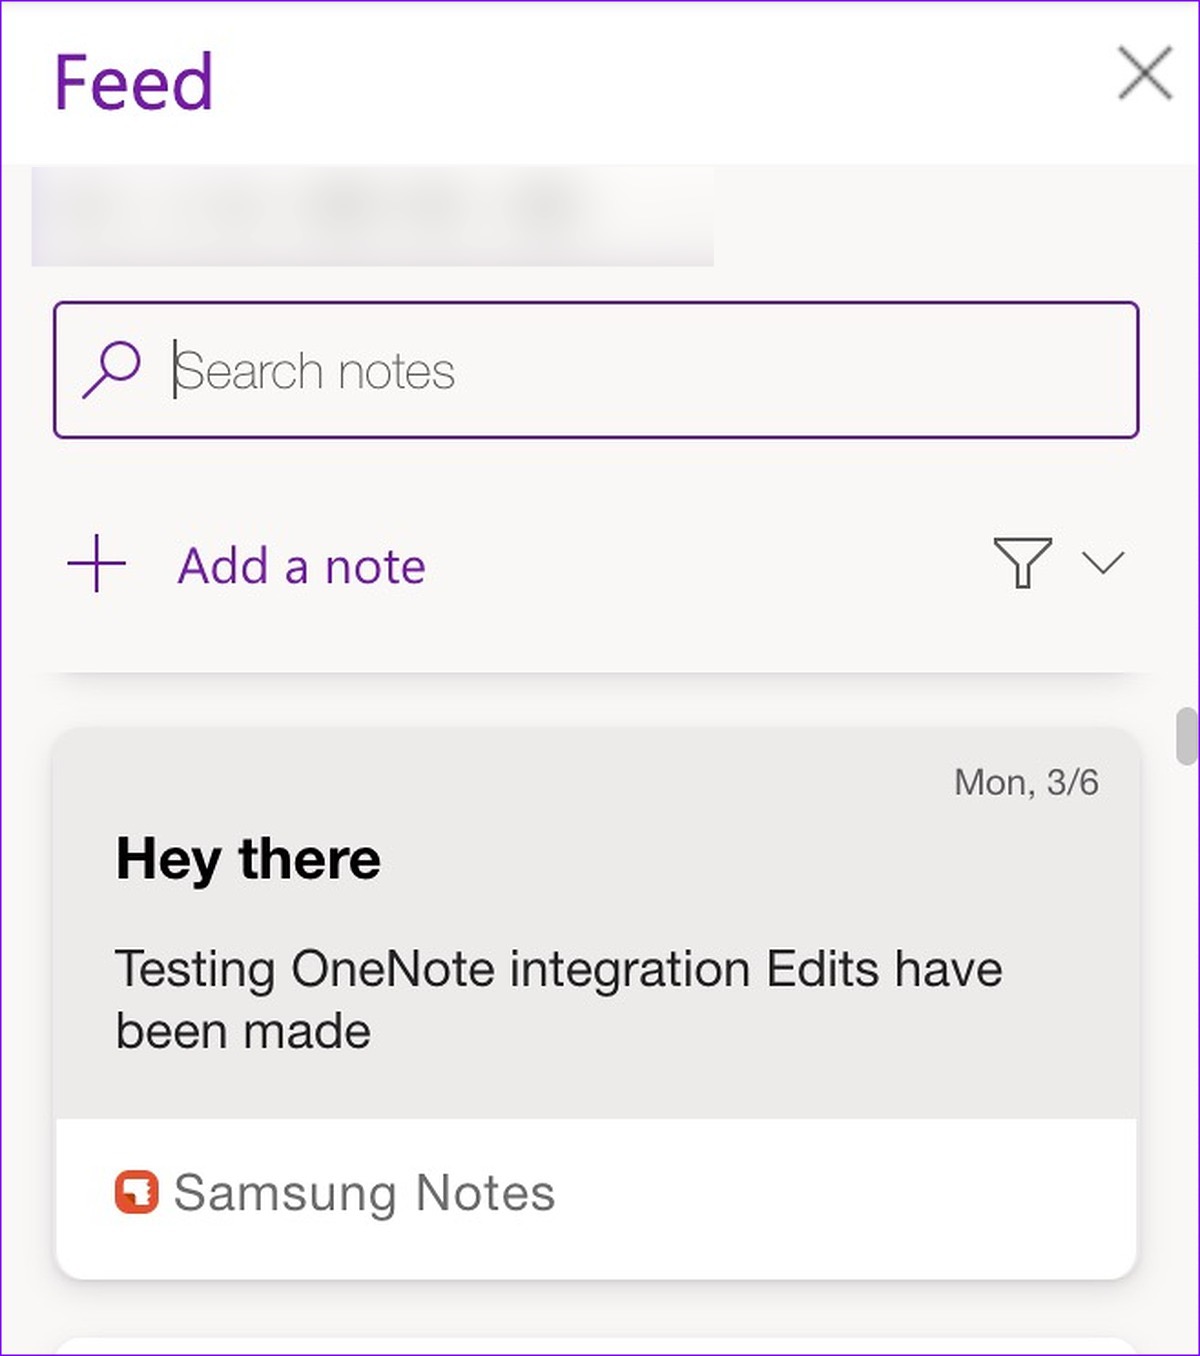 Samsung notes in OneNote feed